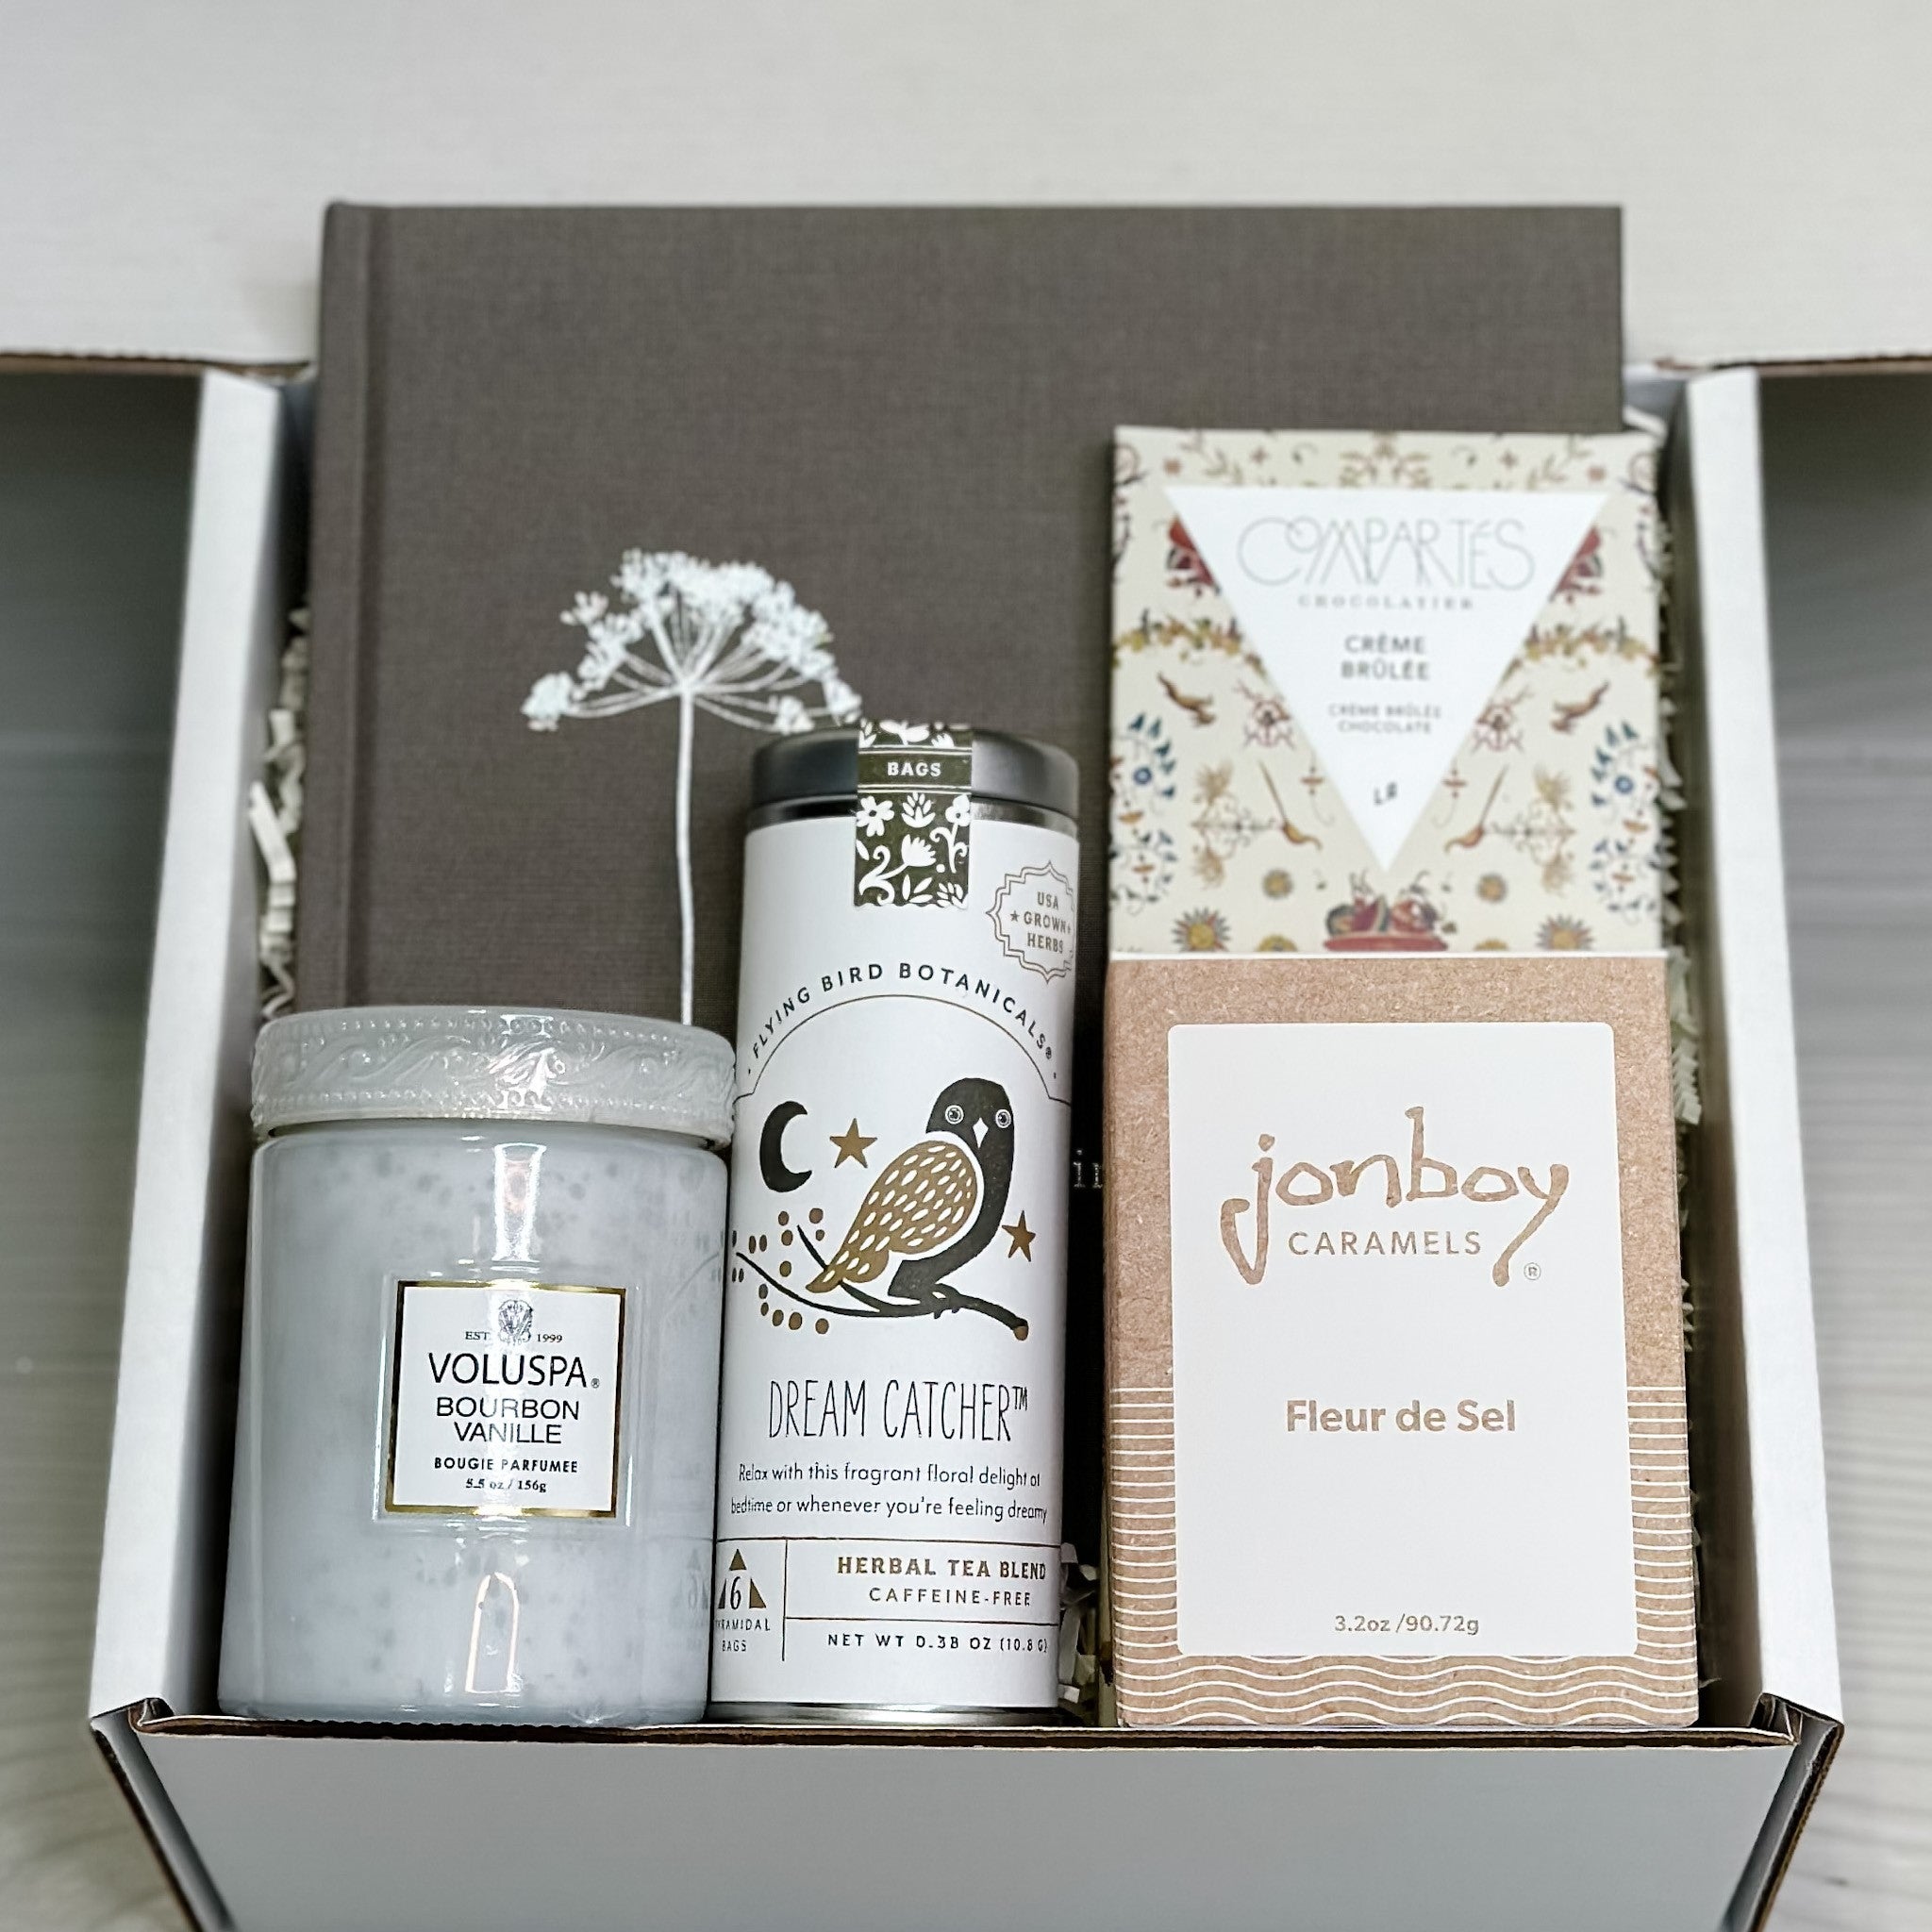 in loving memory book, chocolate, caramel, tea and candle in our sympathy gift basket